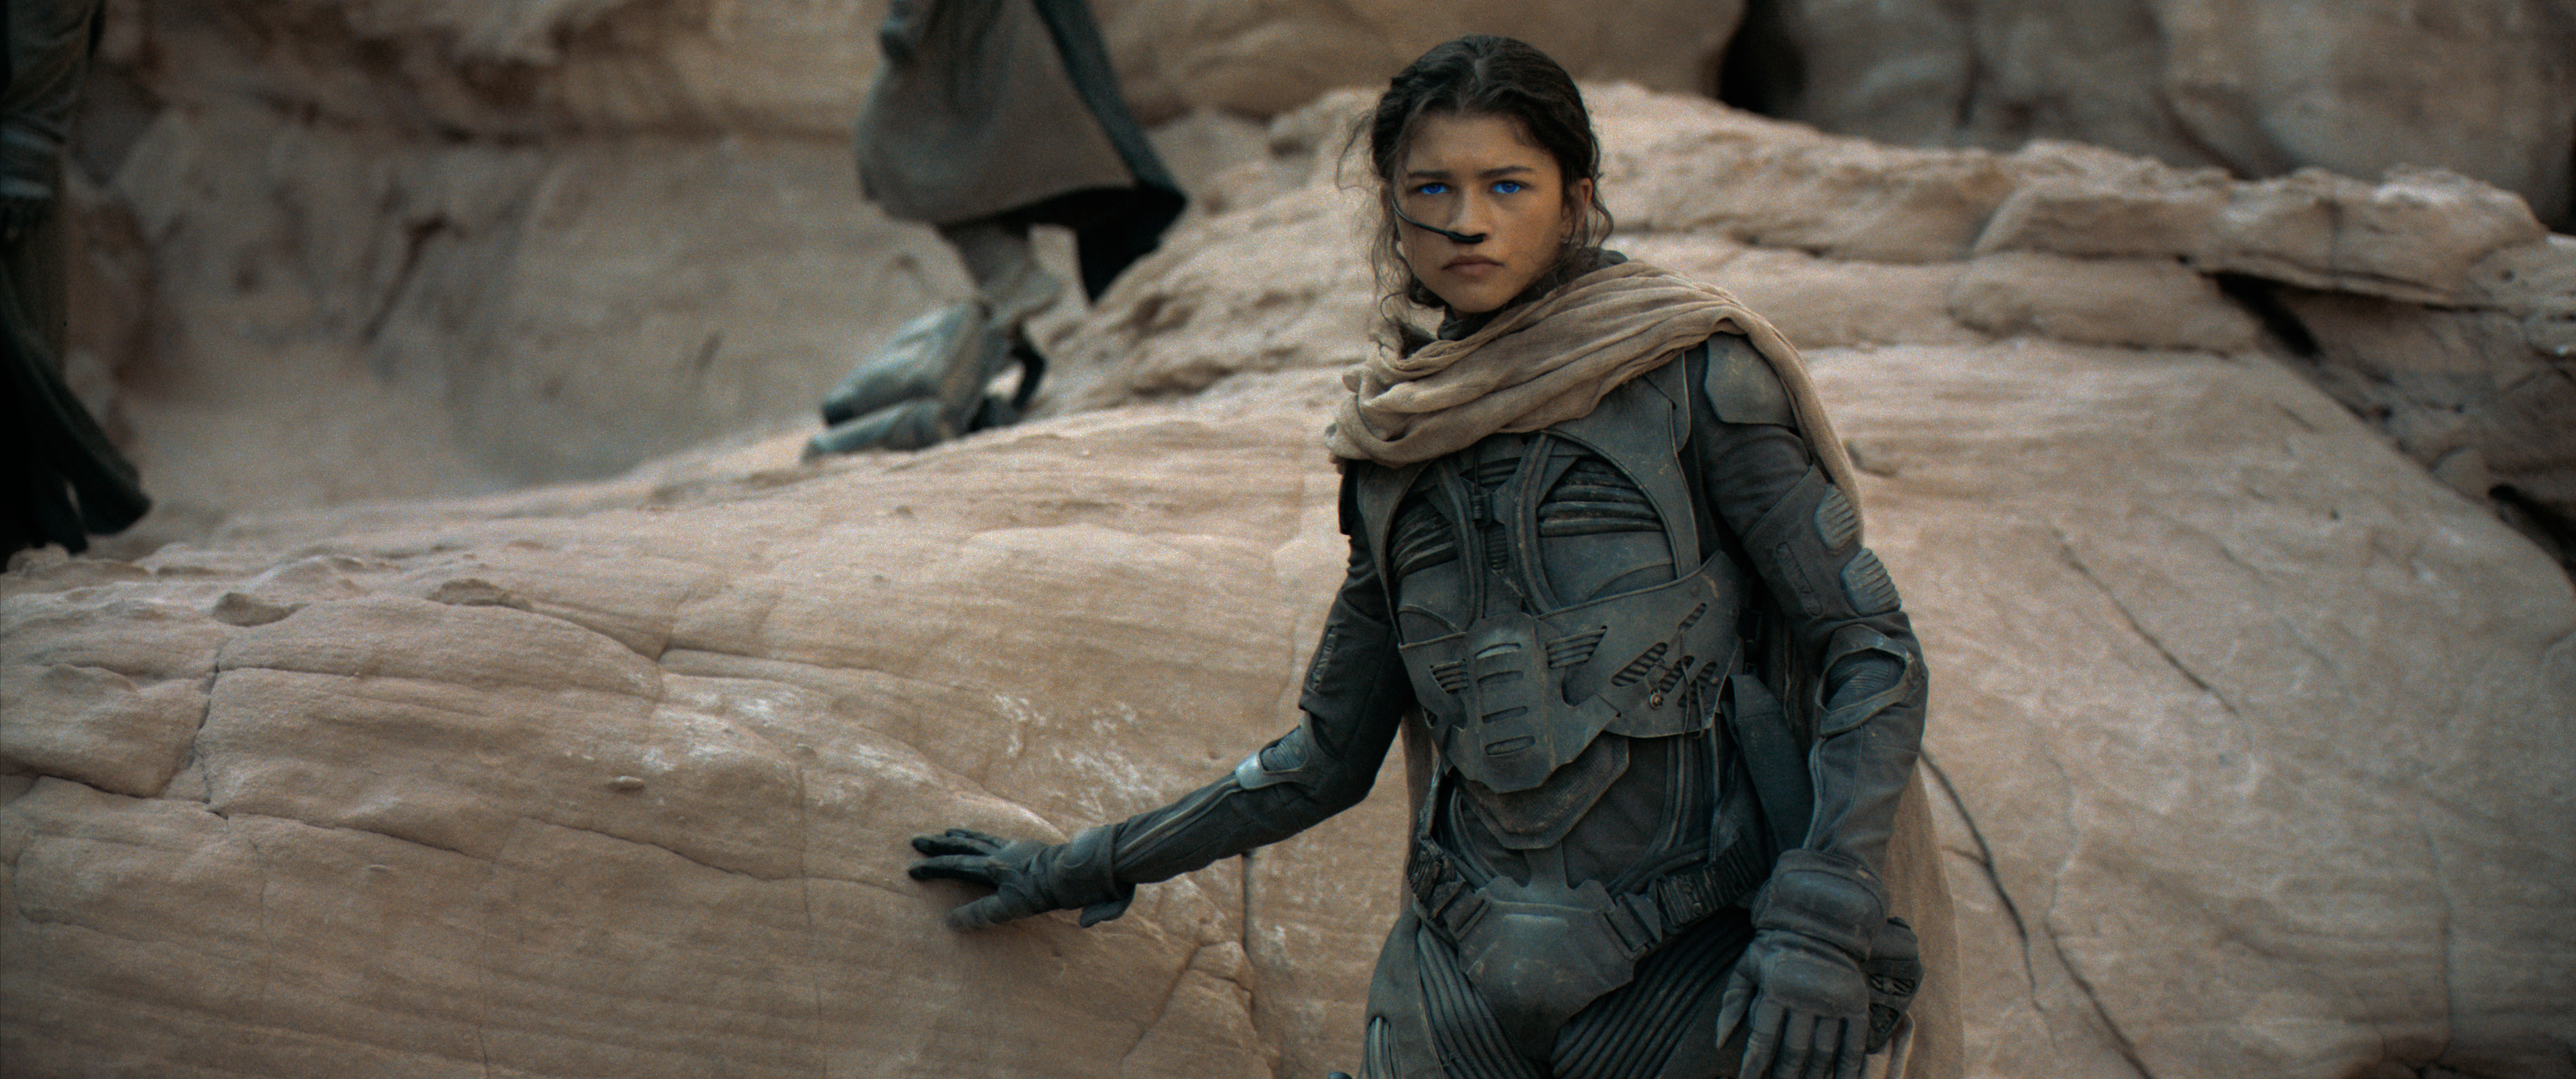 Zendaya as Chani in 'Dune,' which premiered at the Venice Film Festival (Courtesy of Warner Bros. Pictures and Legendary Pictures)